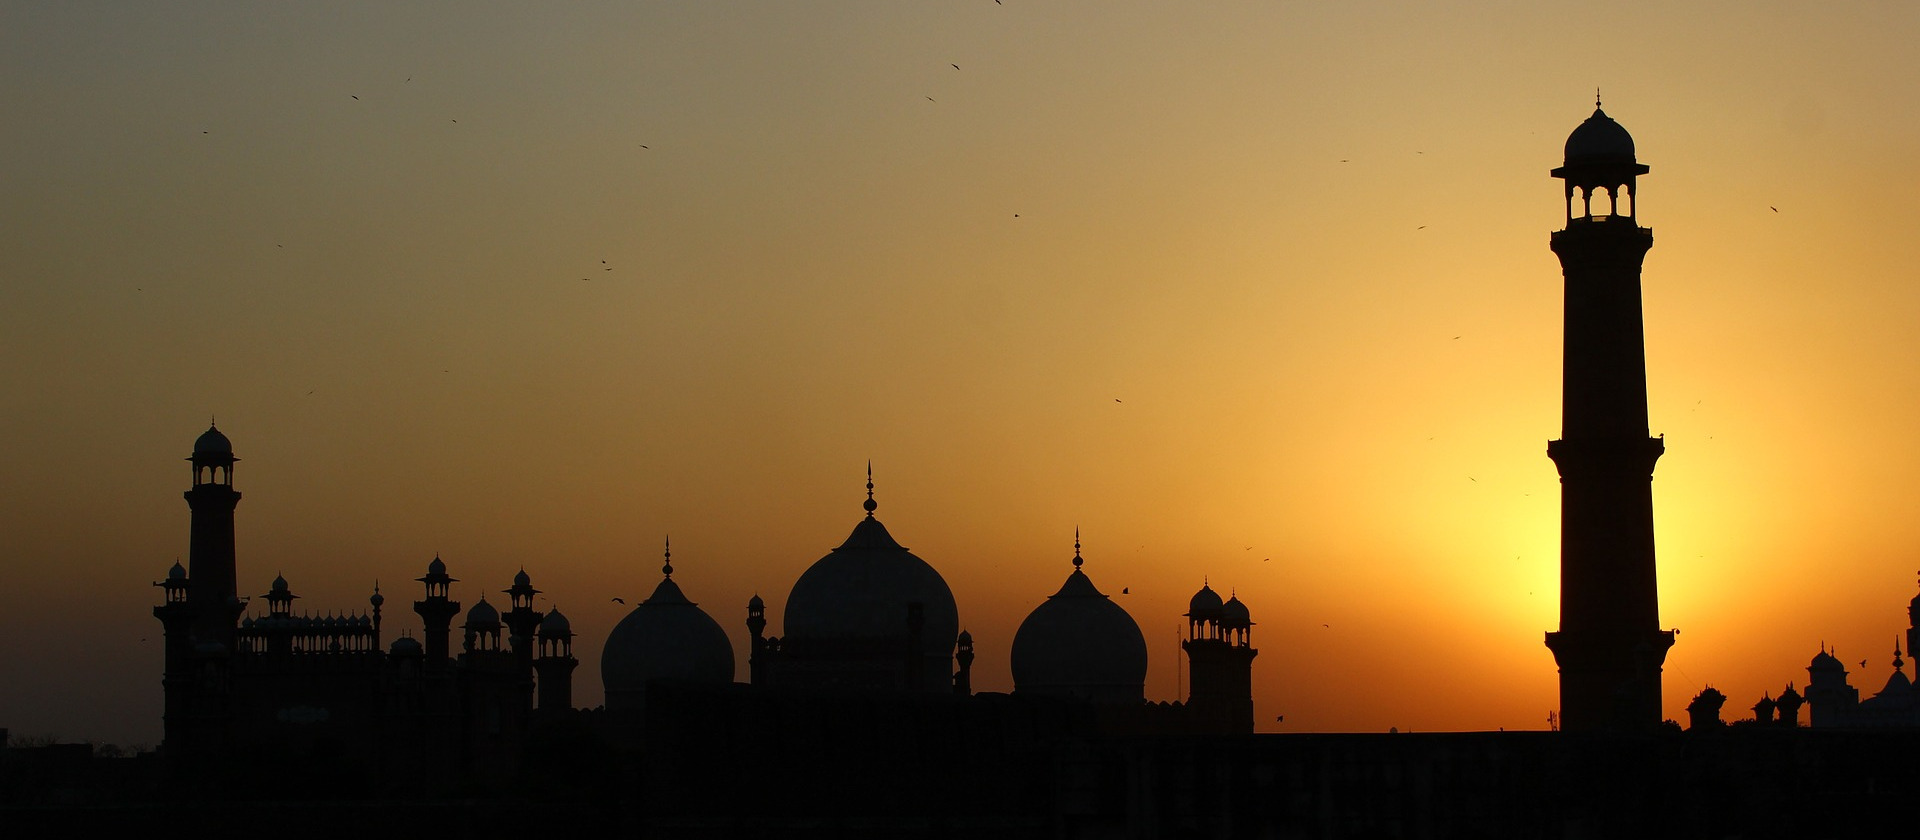 Sunset silhouette at Fort Lahore, Pakistan